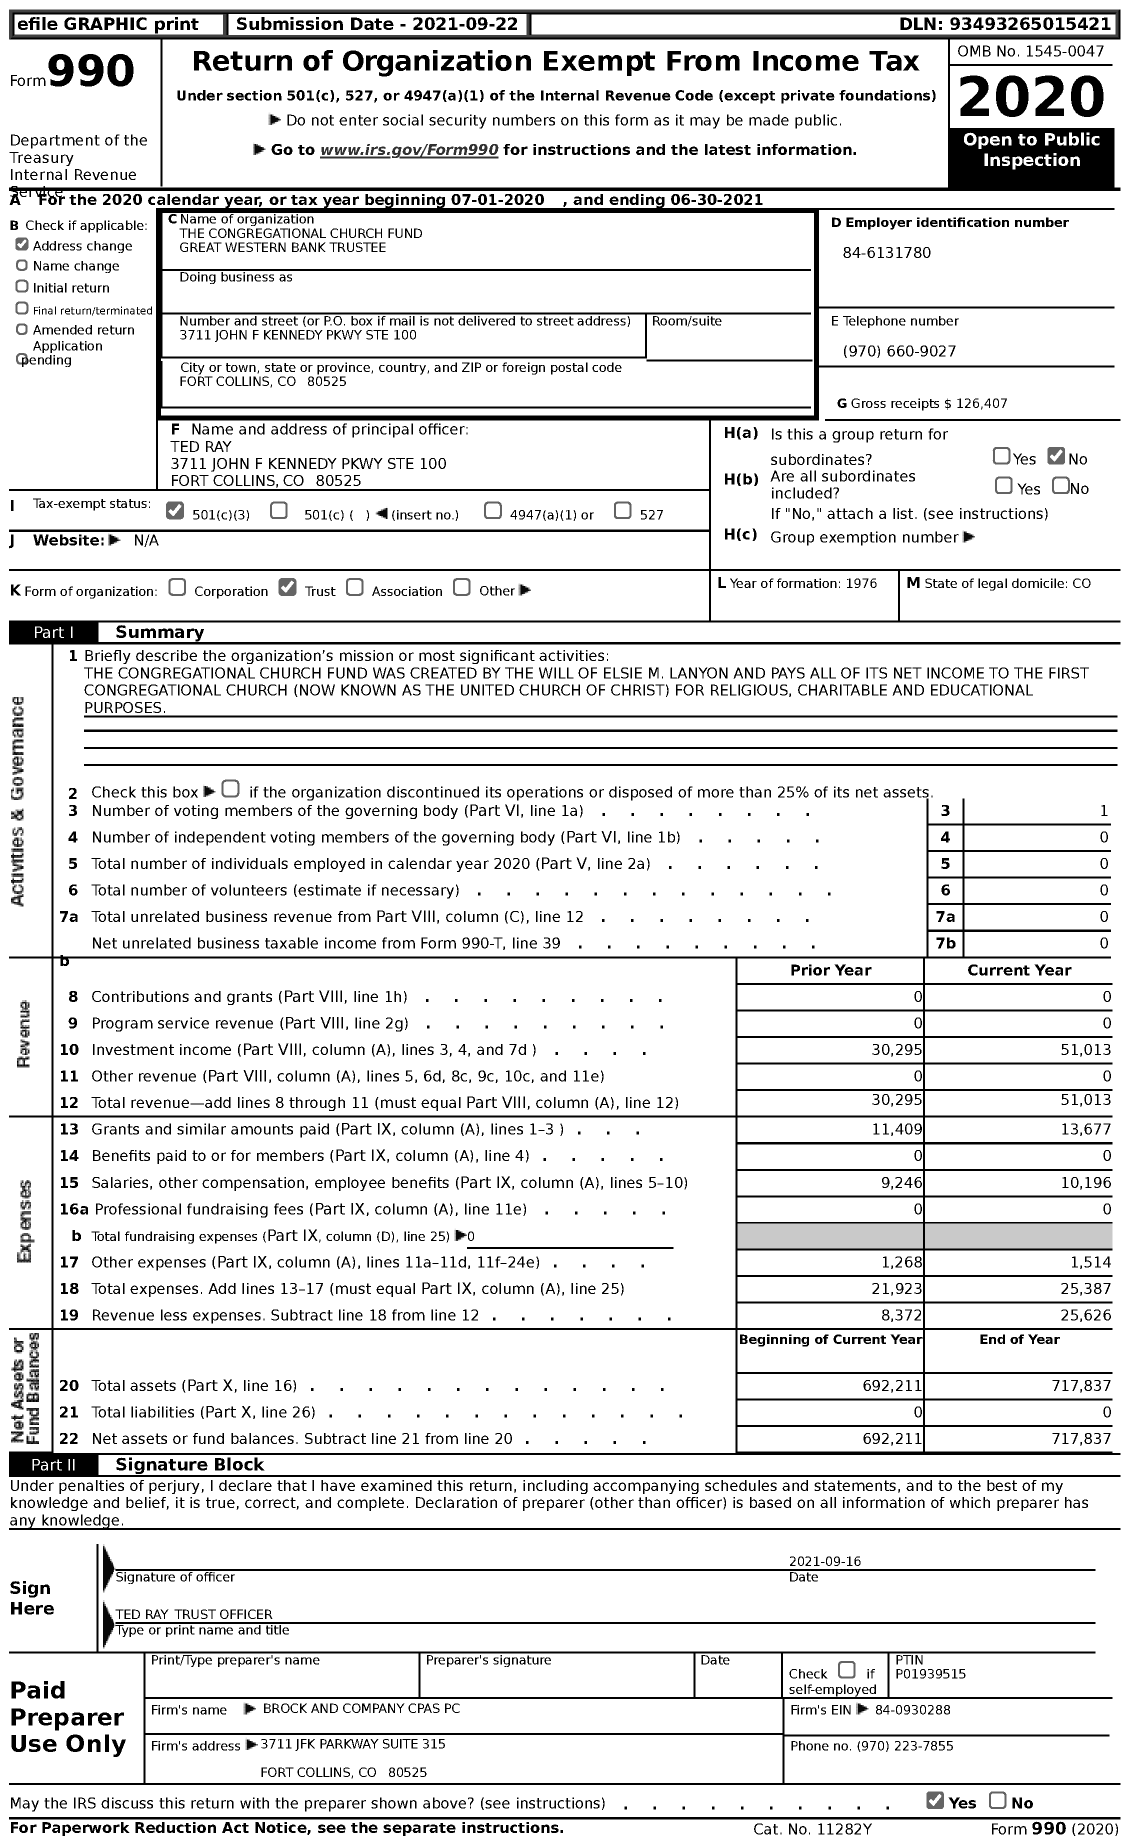 Image of first page of 2020 Form 990 for The Congregational Church Fund First Interstate Bank Trustee